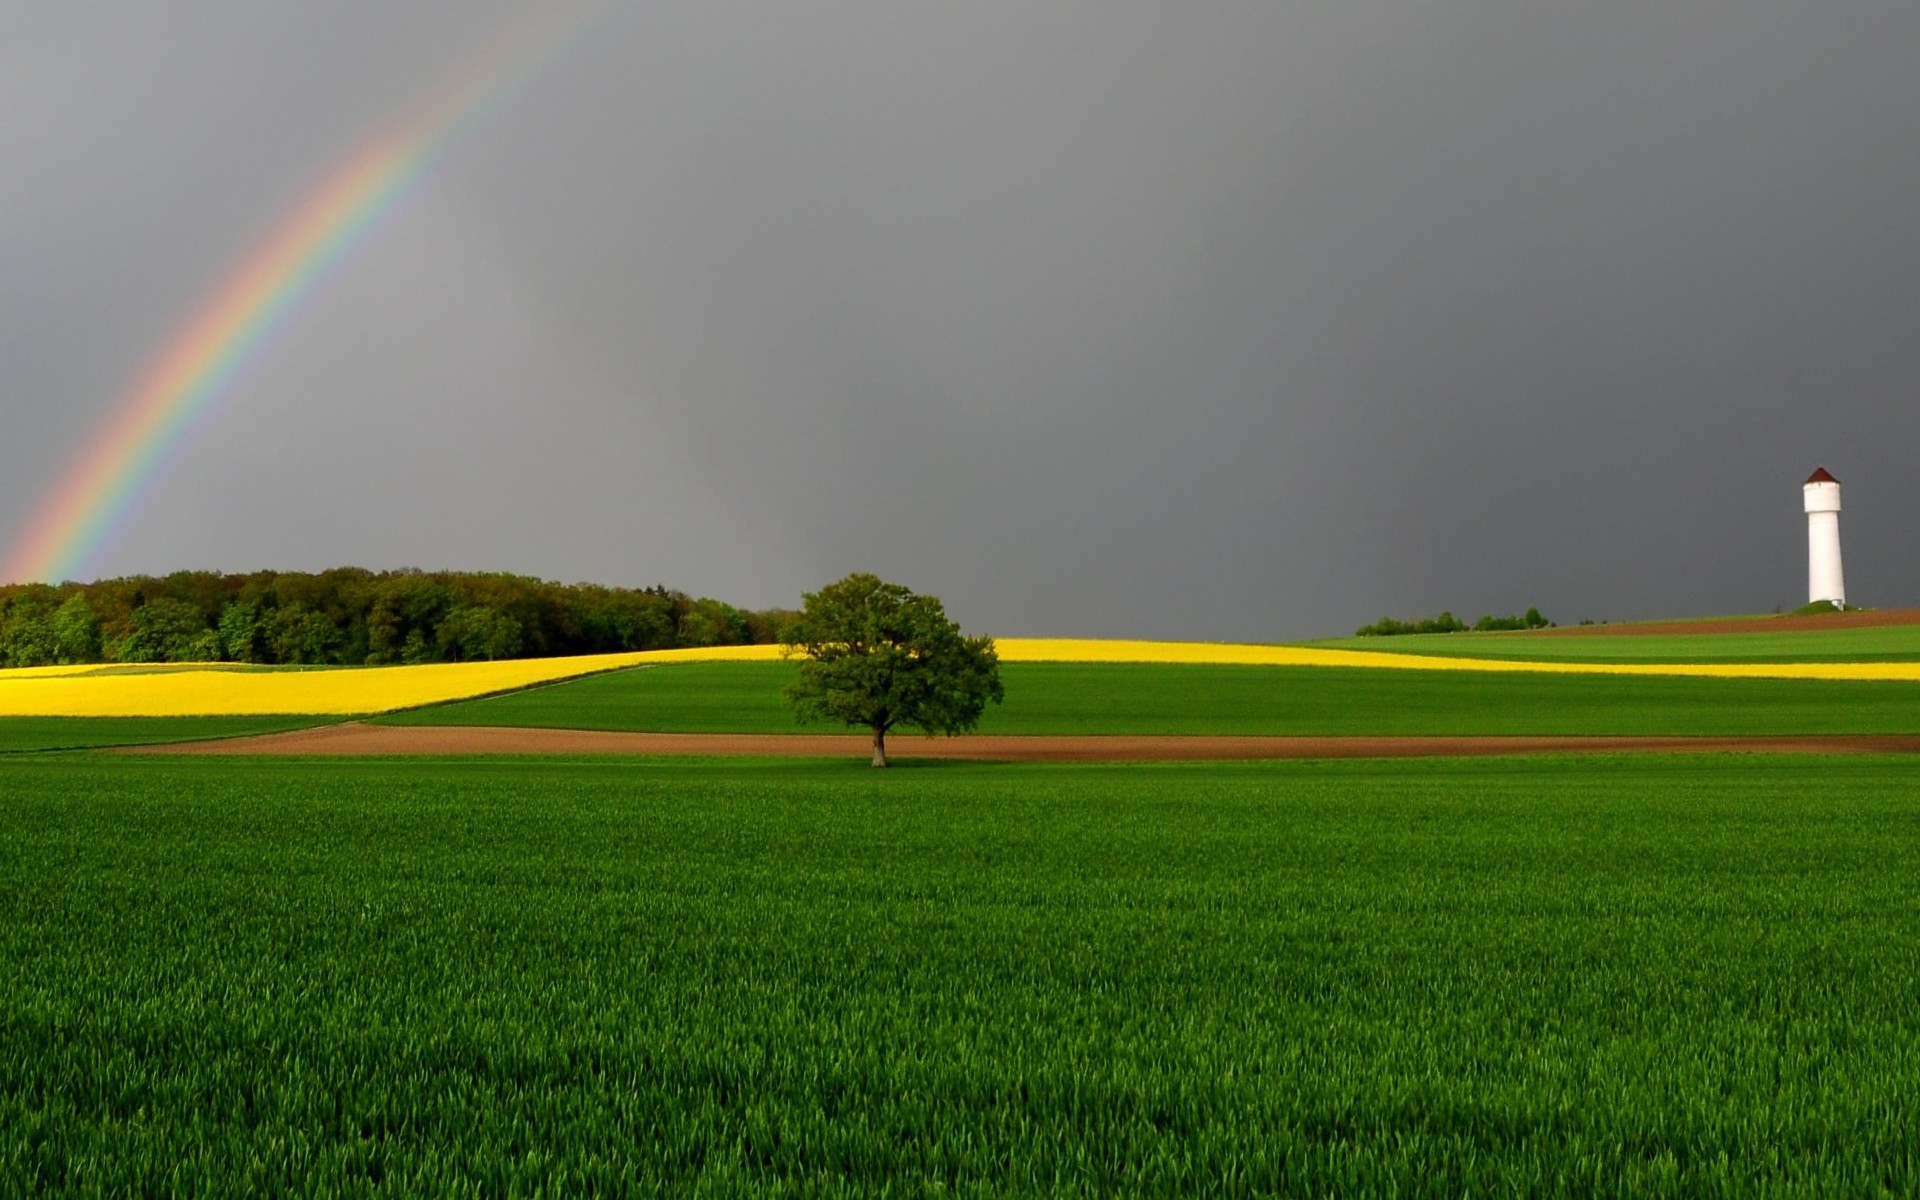 landscapes rainbow agriculture field farm landscape grass sky rural cropland countryside hayfield outdoors rain storm nature wheat summer scenery